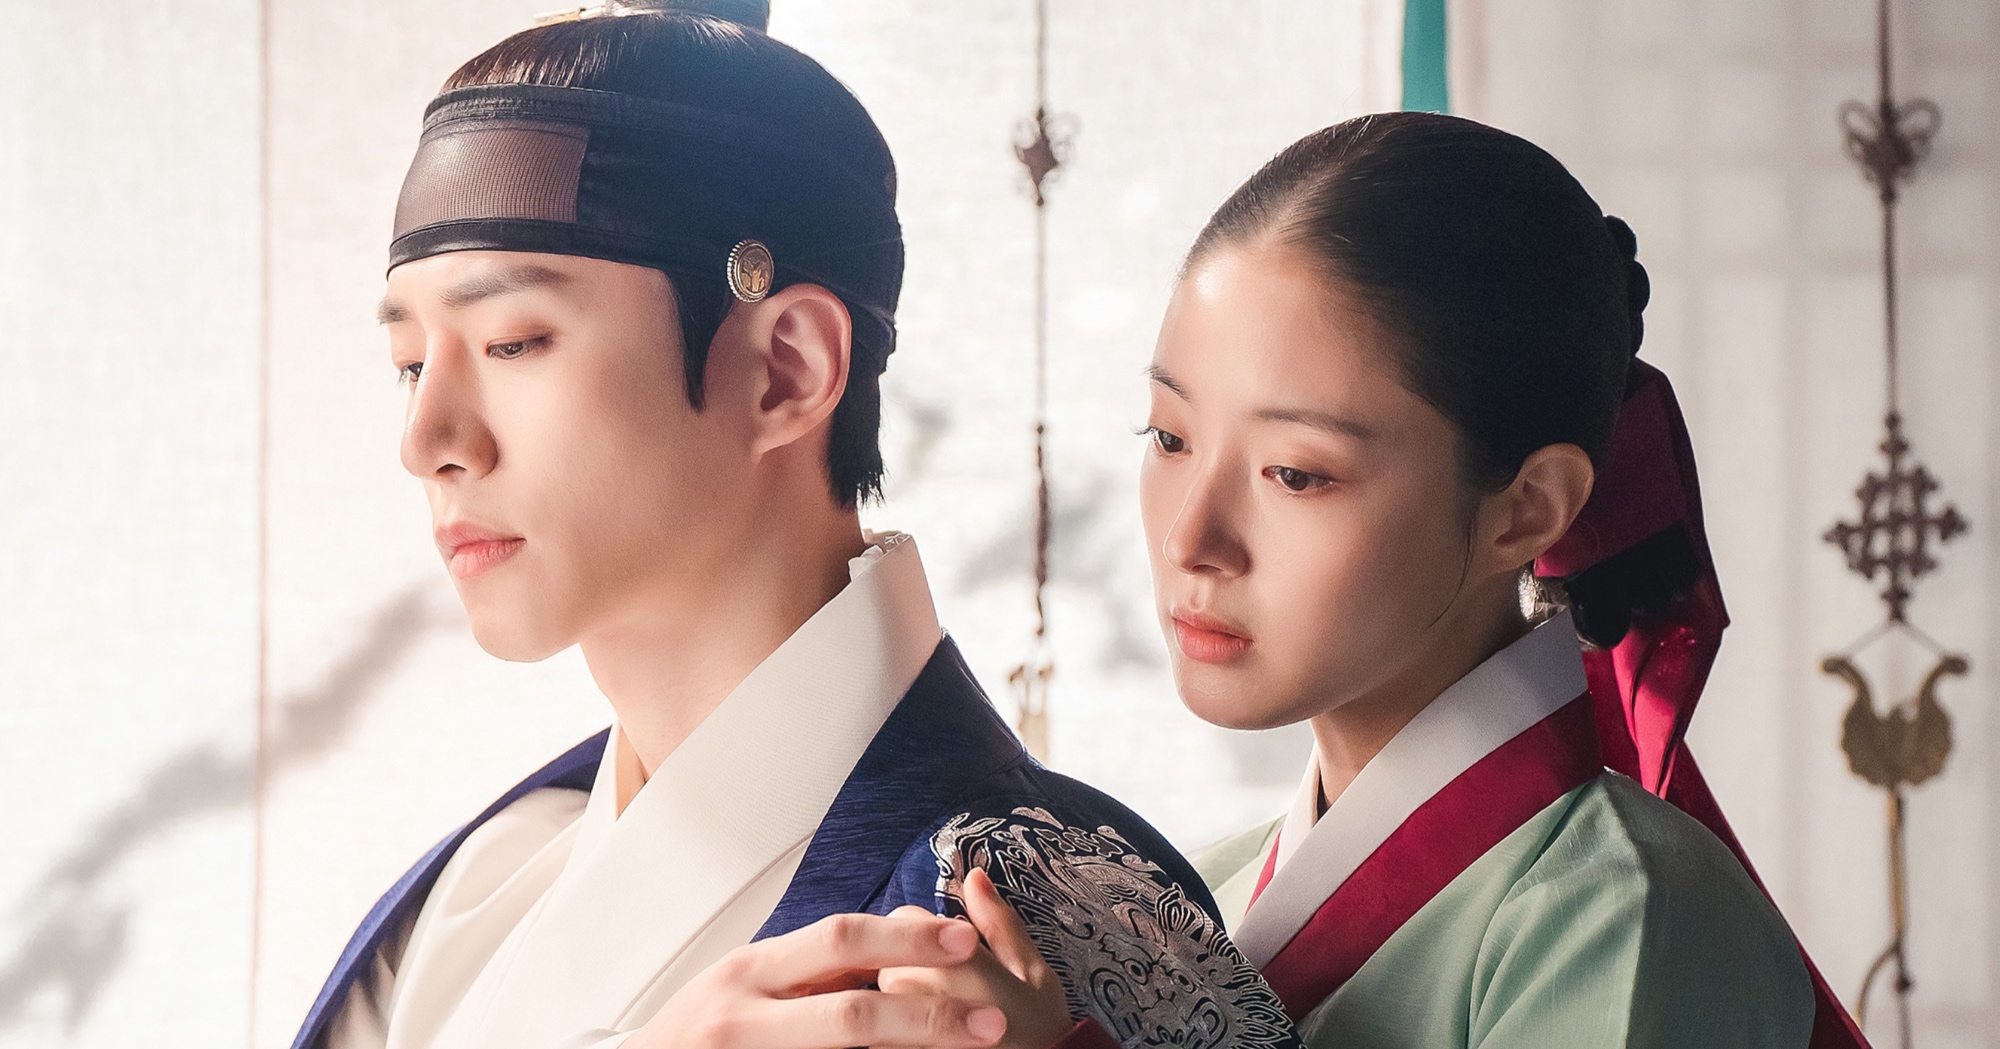 Characters Yi San and Deok-im from 'The Red Sleeve' wearing traditional Korean clothing.